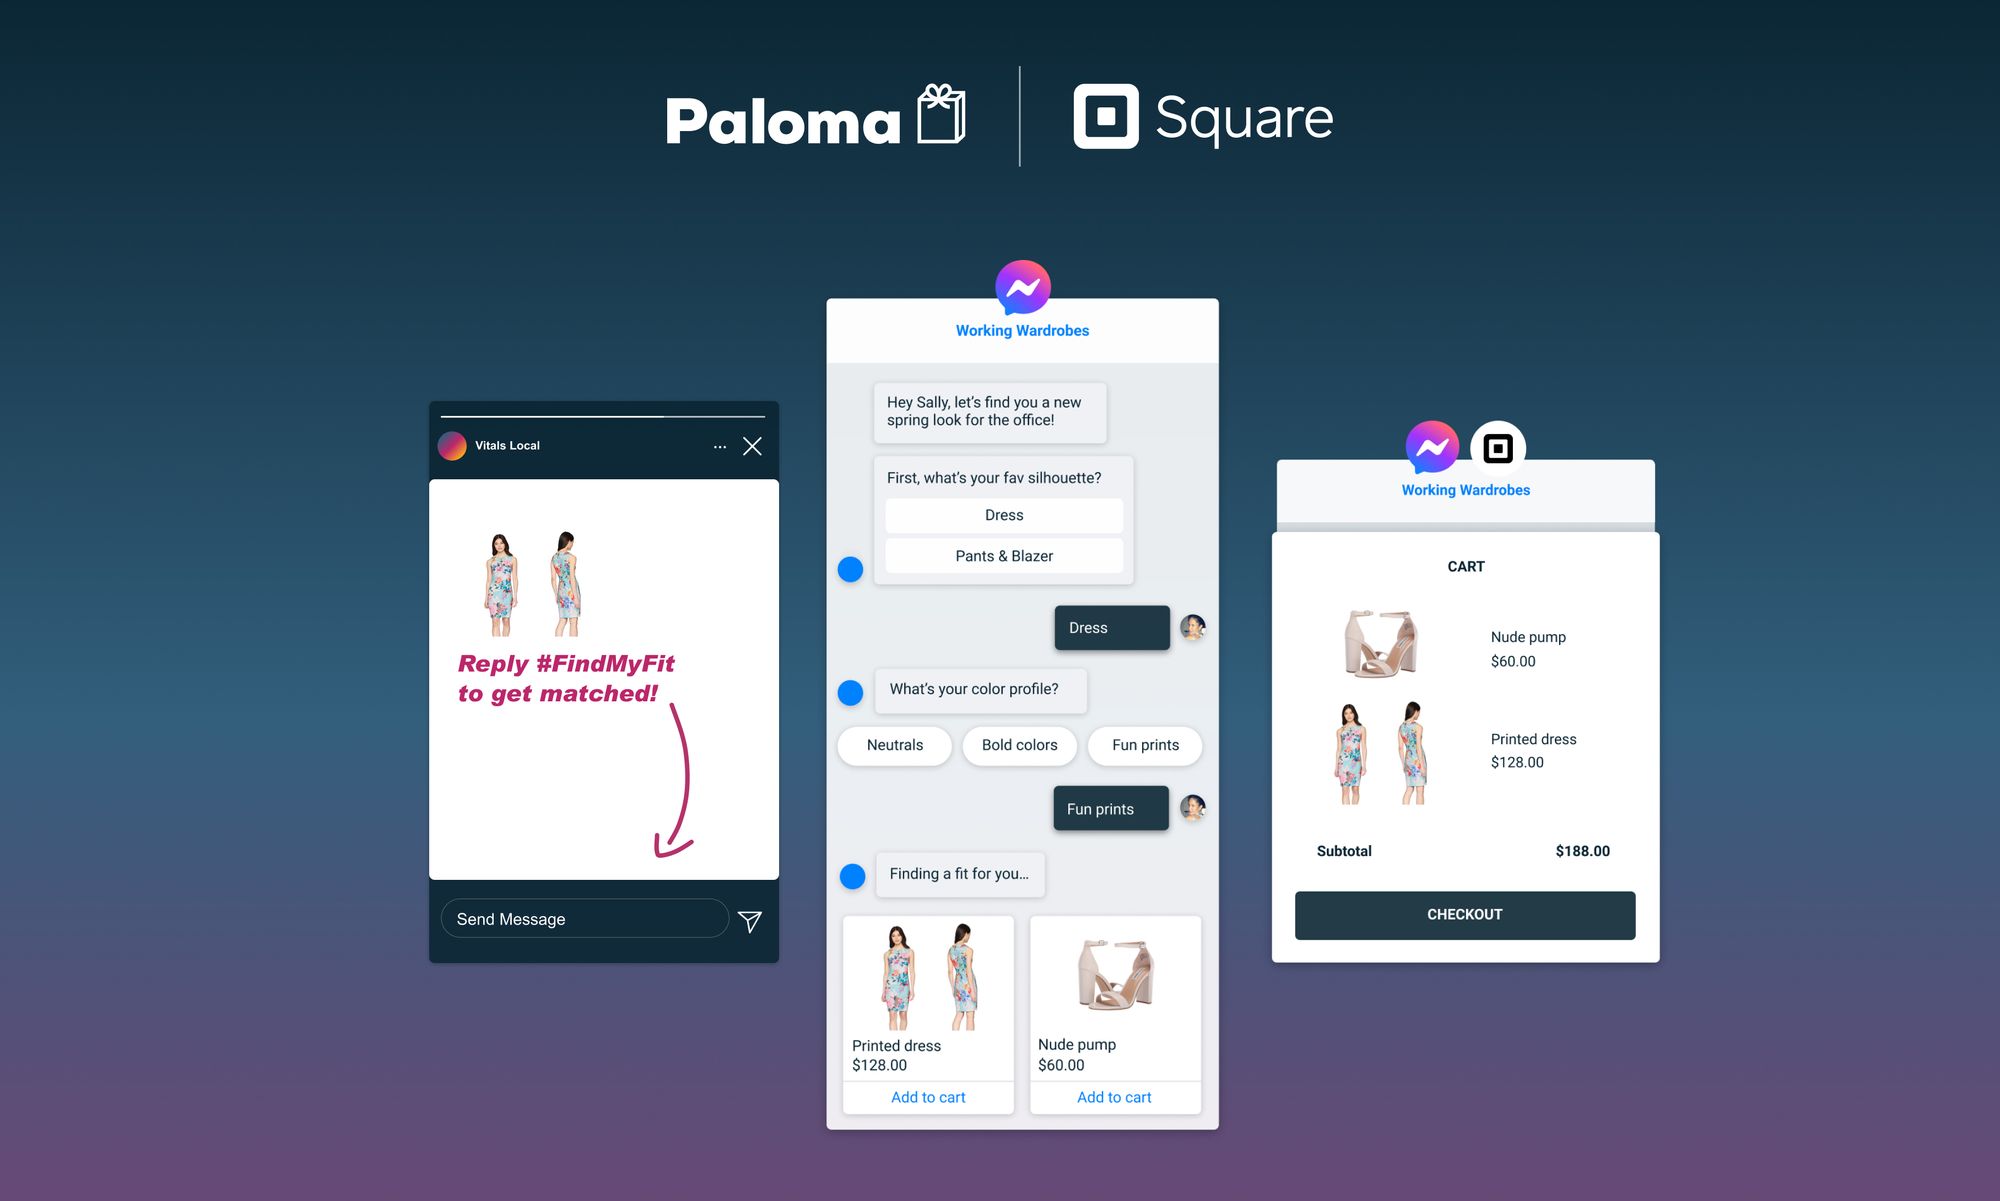 Paloma and Square Join Forces to Make DMs a Powerful New Sales Channel for Small Businesses